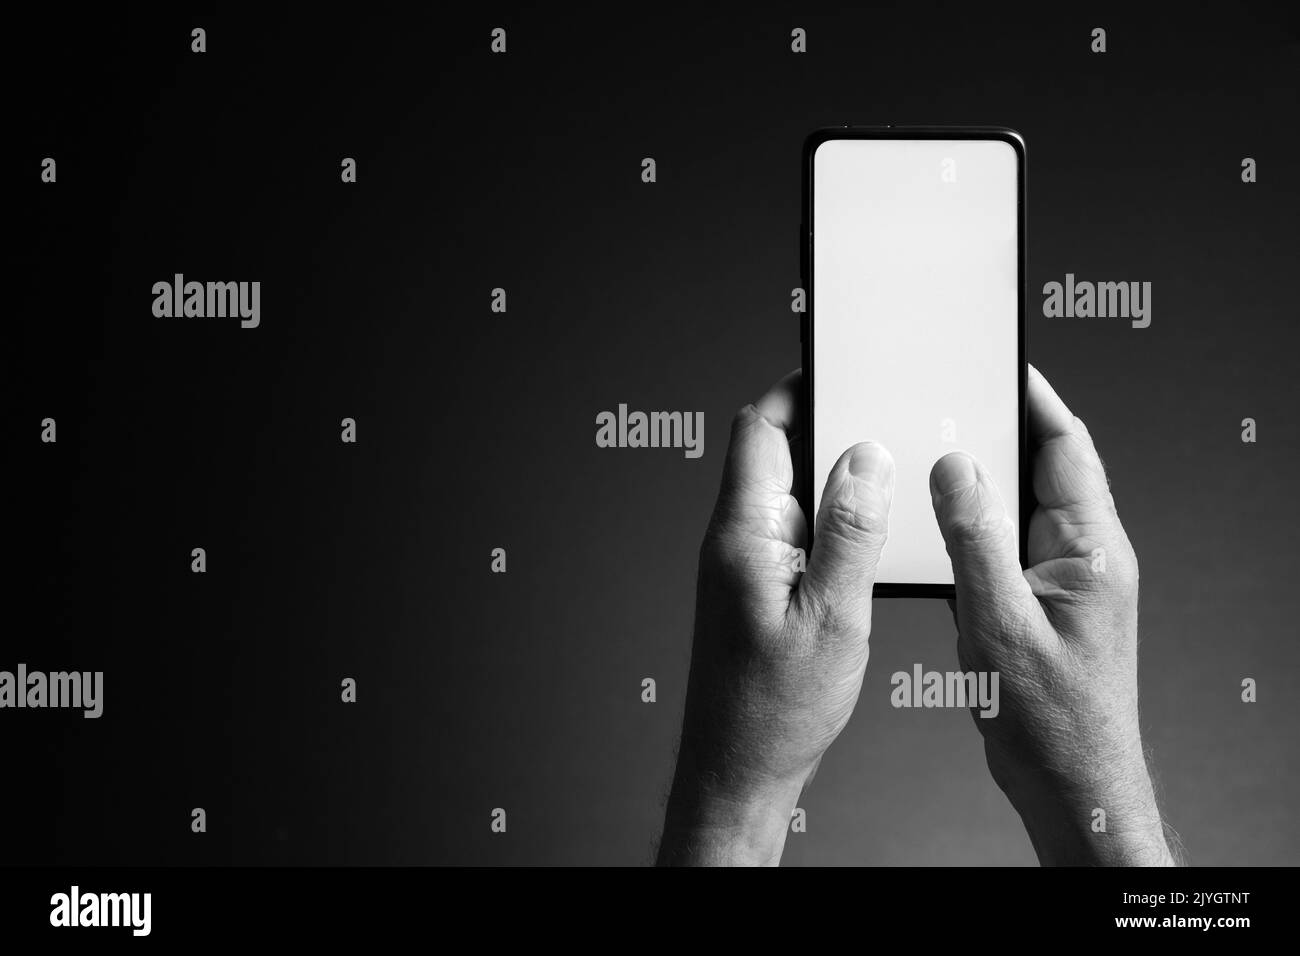 Black and white image of man's hands holding smart phone and texting with blank white screen isolated on dark background with copy space Stock Photo